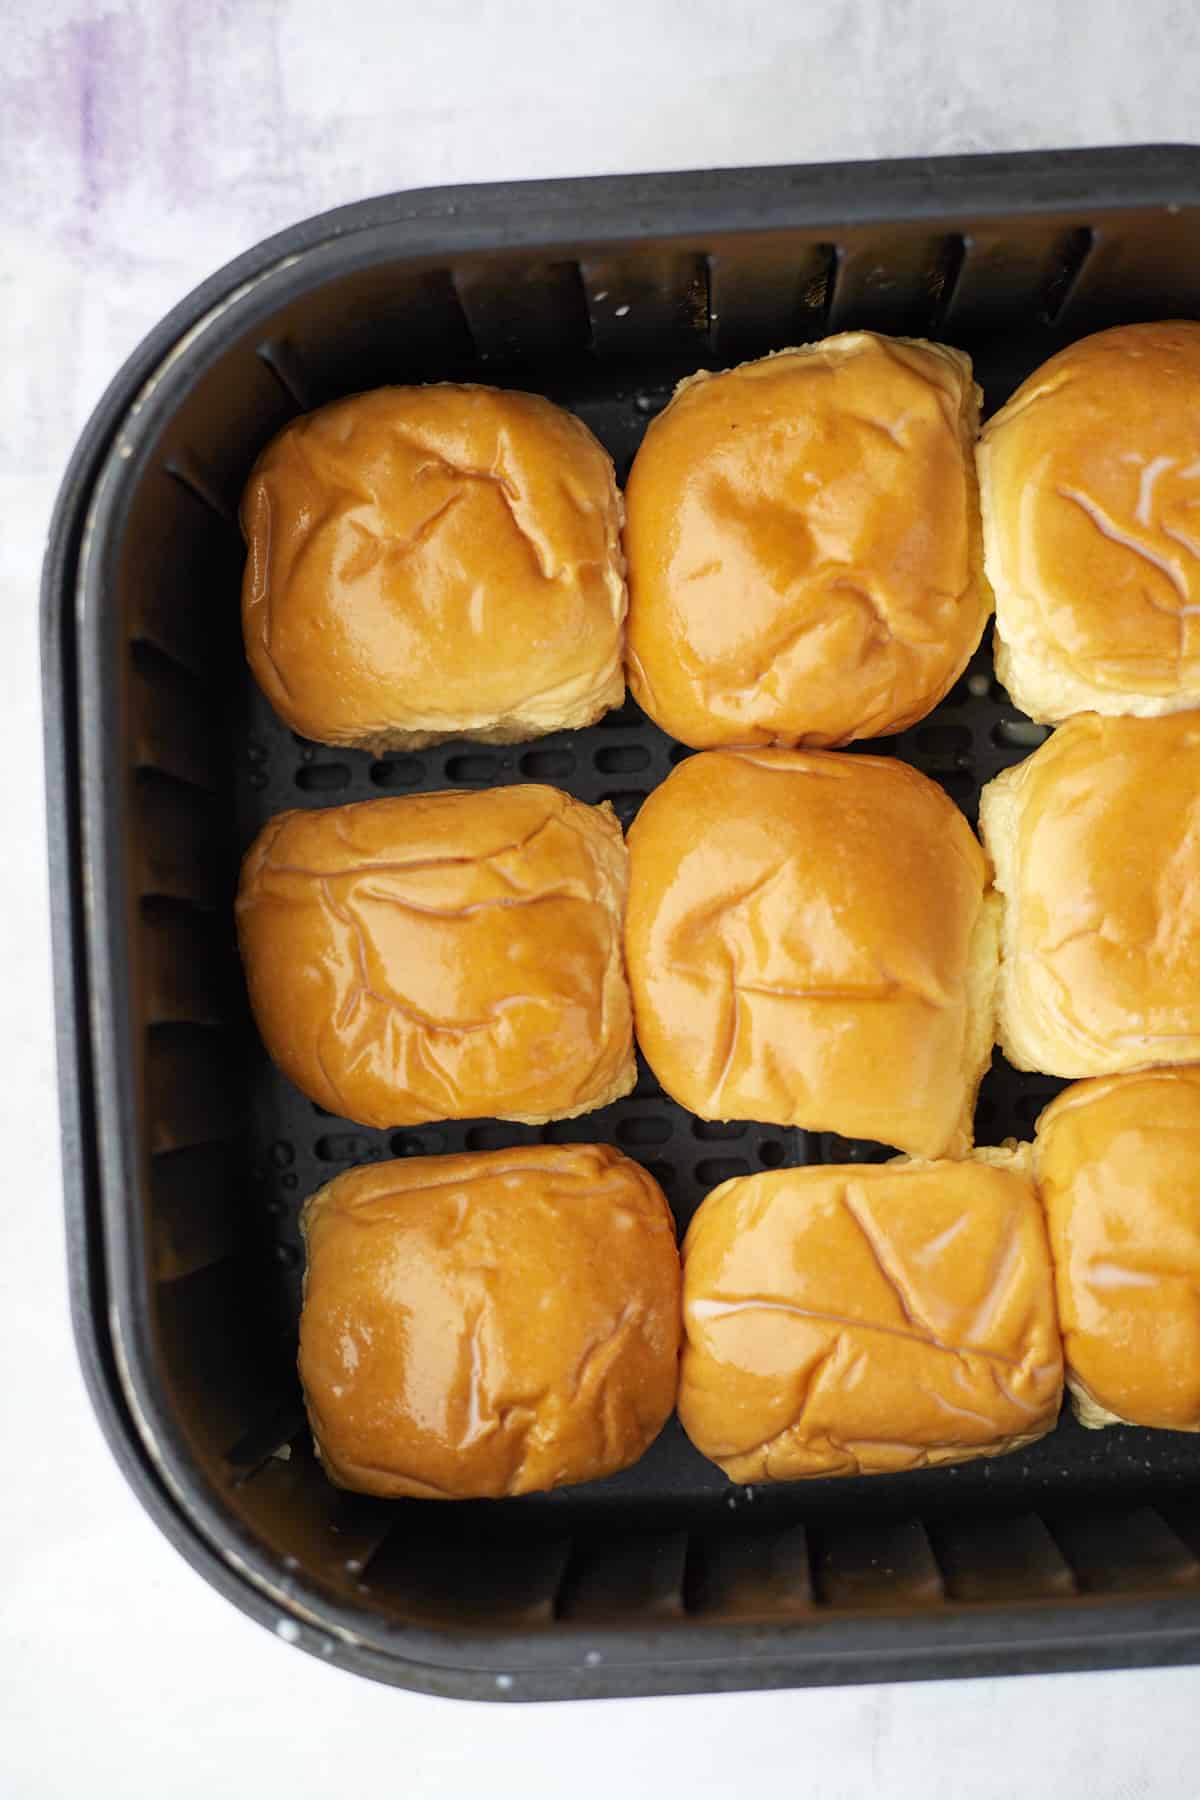 9 brioche buns in an air fryer to make air fryer french toast